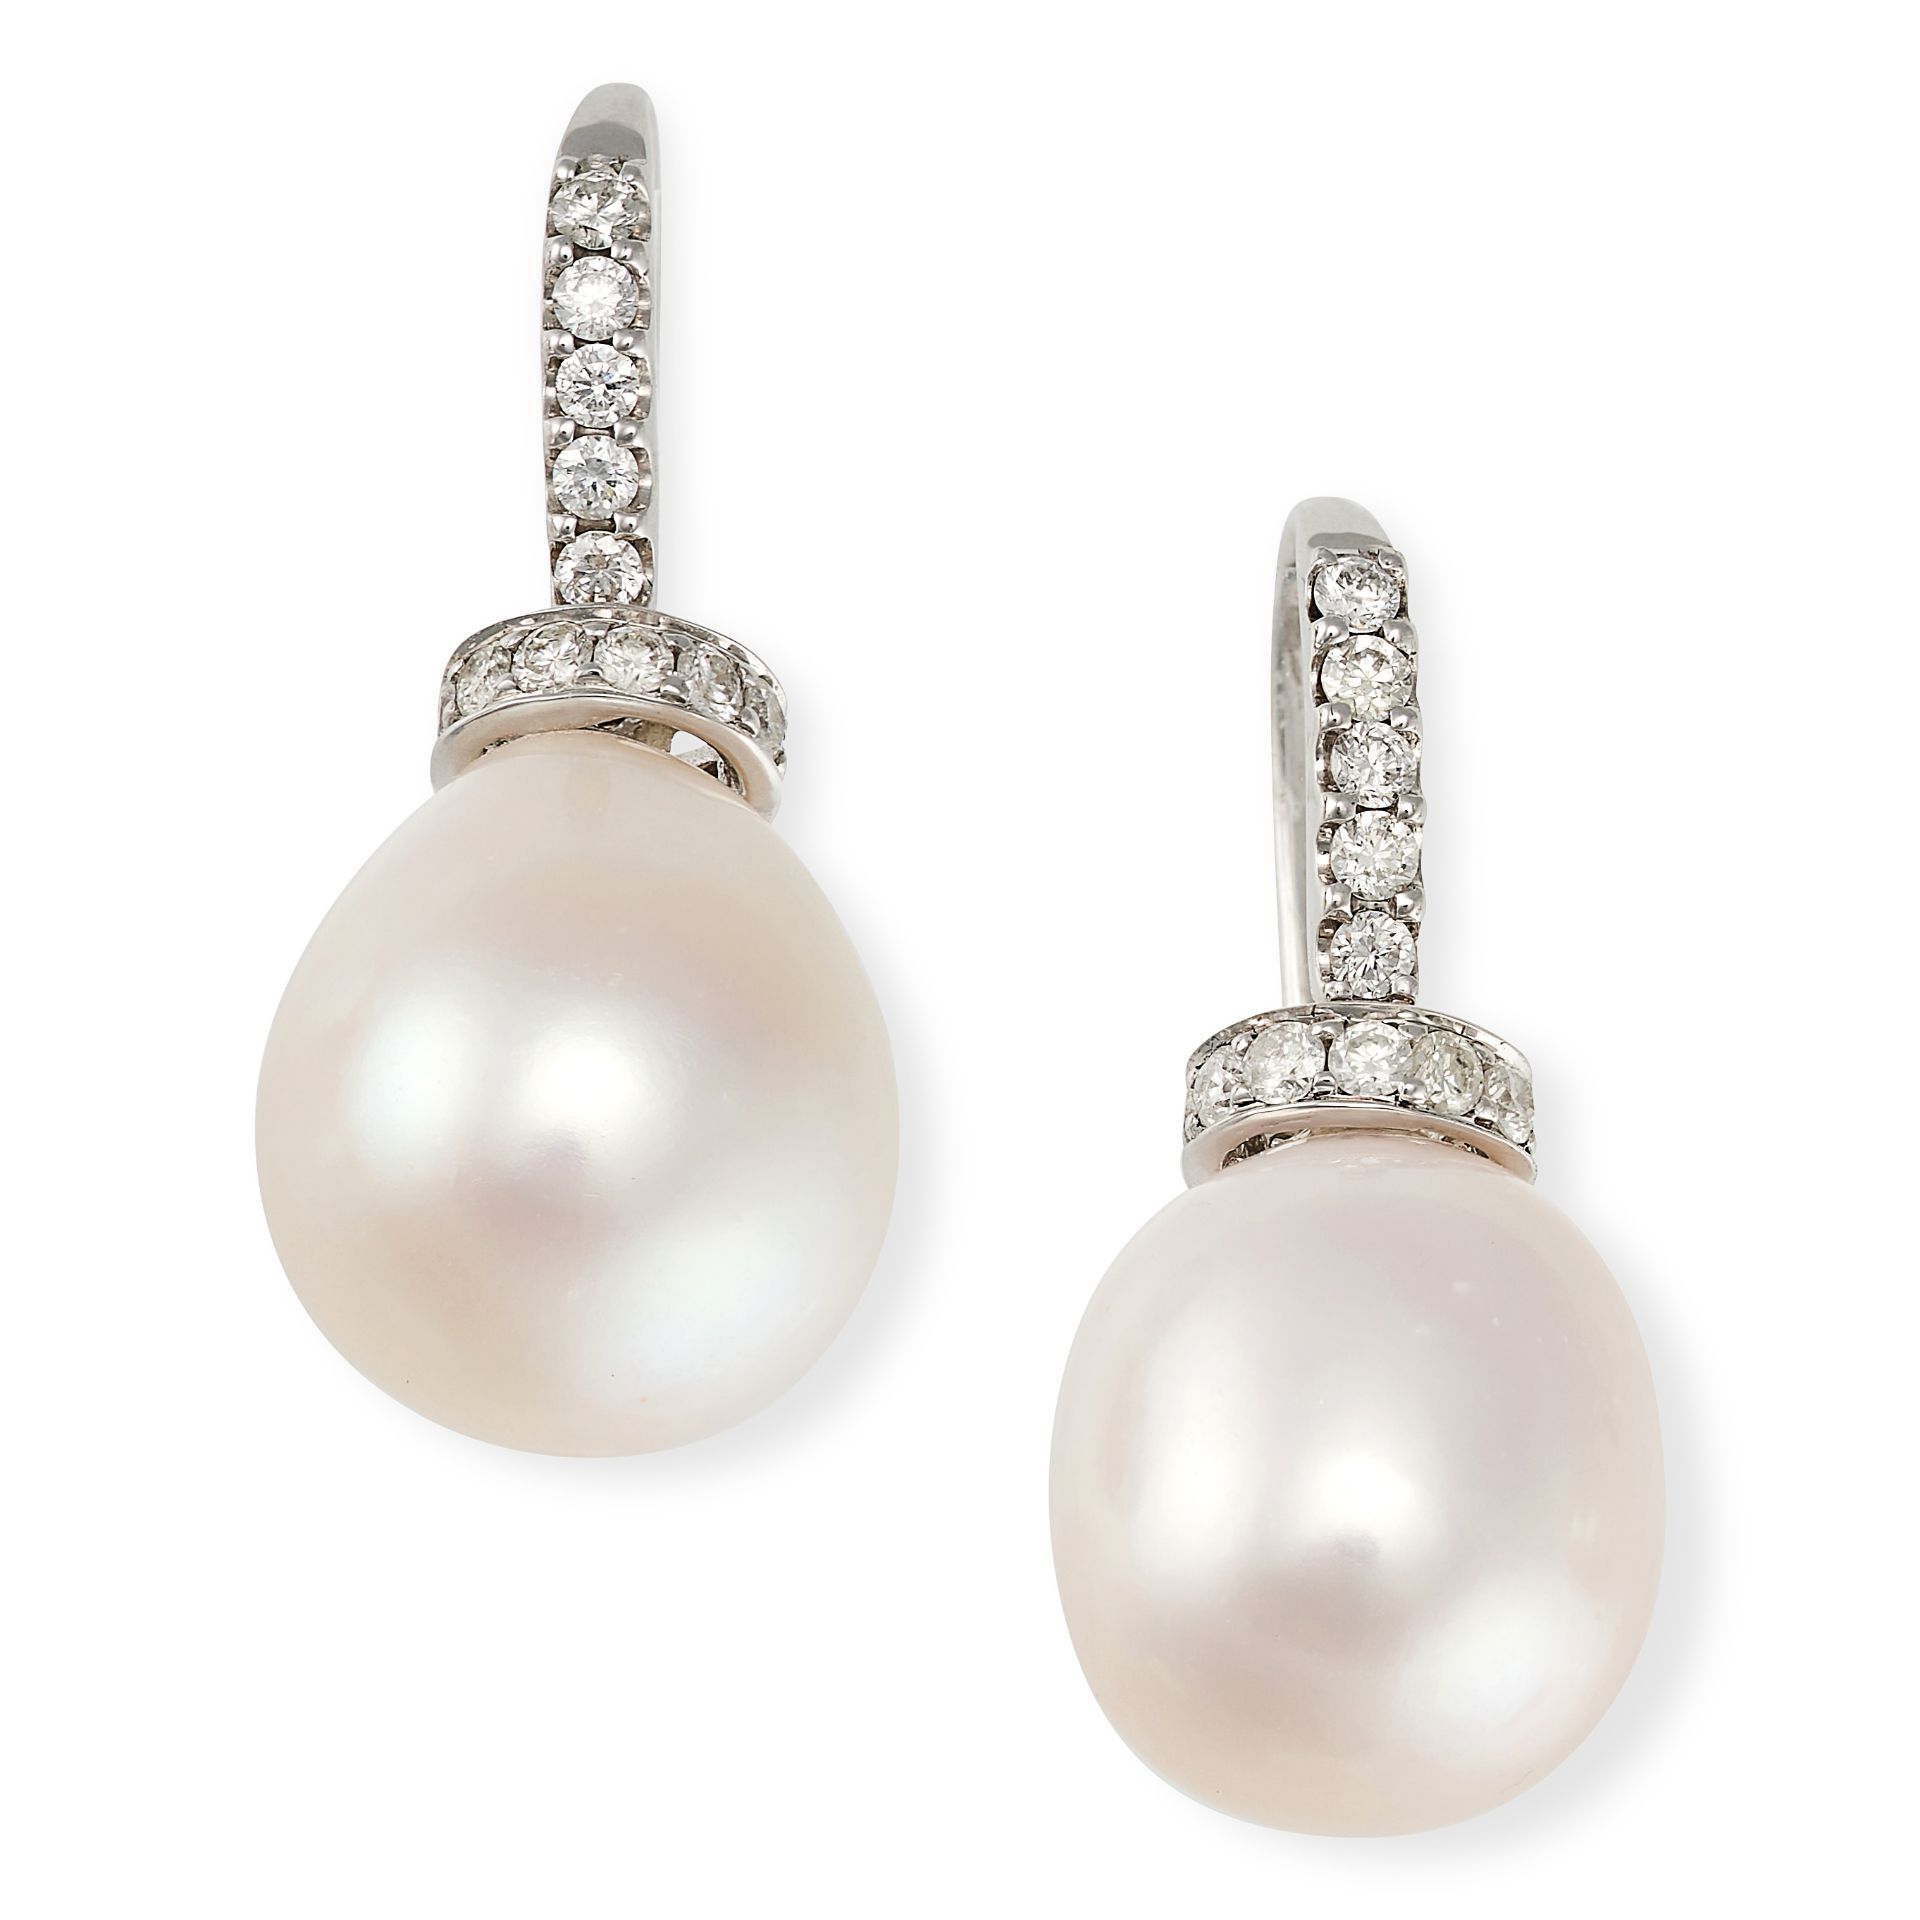 A PAIR OF PEARL AND DIAMOND DROP EARRINGS in white gold, set with a row of round brilliant cut